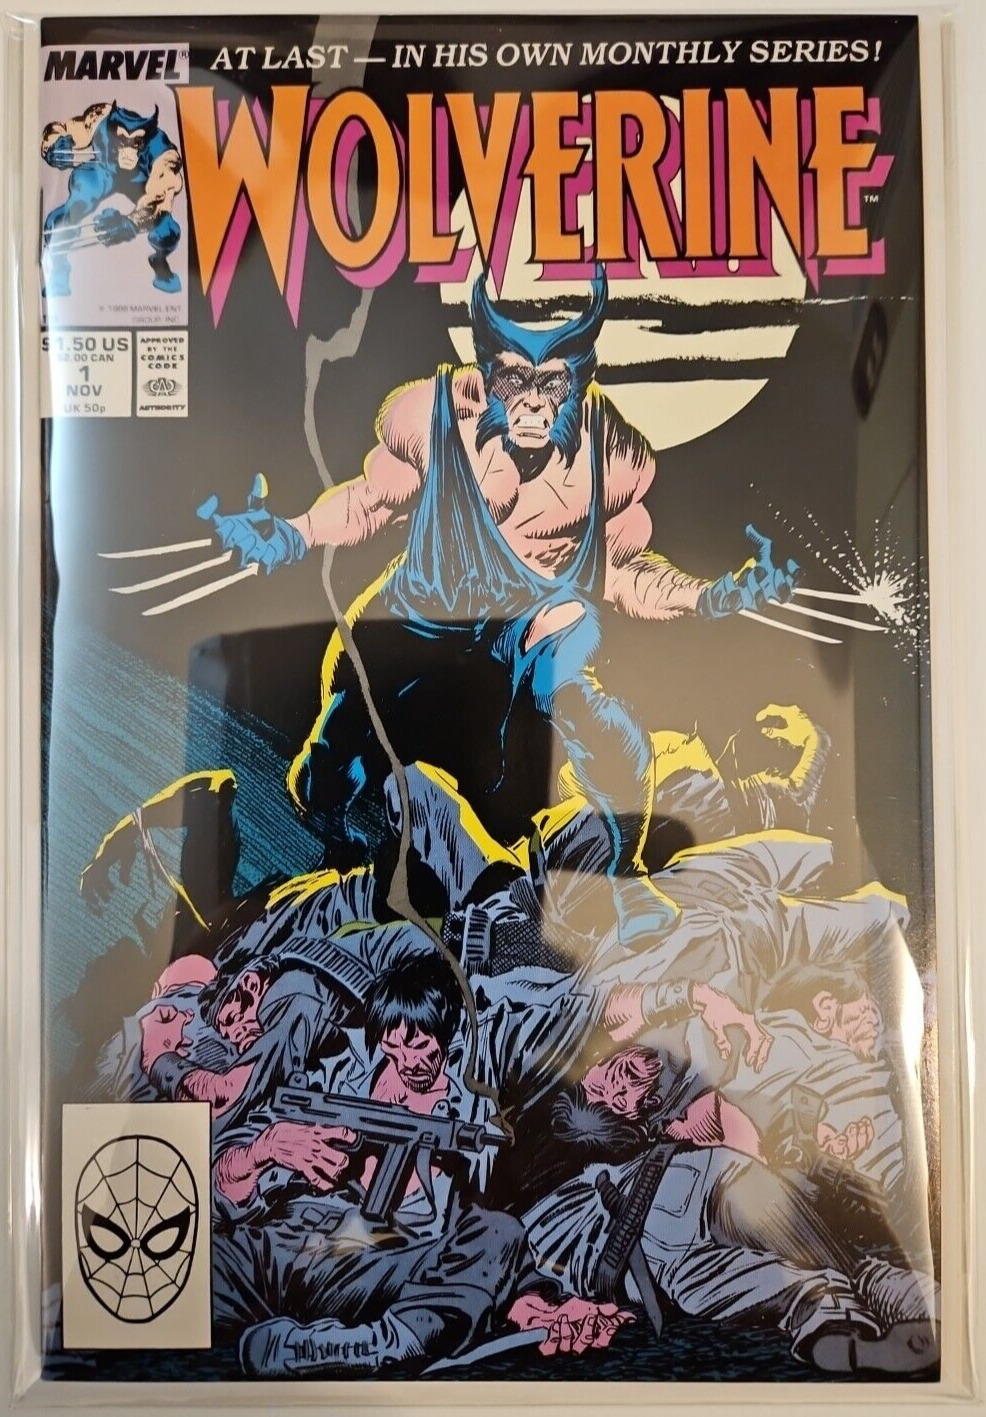 WOLVERINE #1 1ST APPEARANCE WOLVERINE AS PATCH KEY RARE HIGH GRADE 1988 MARVEL